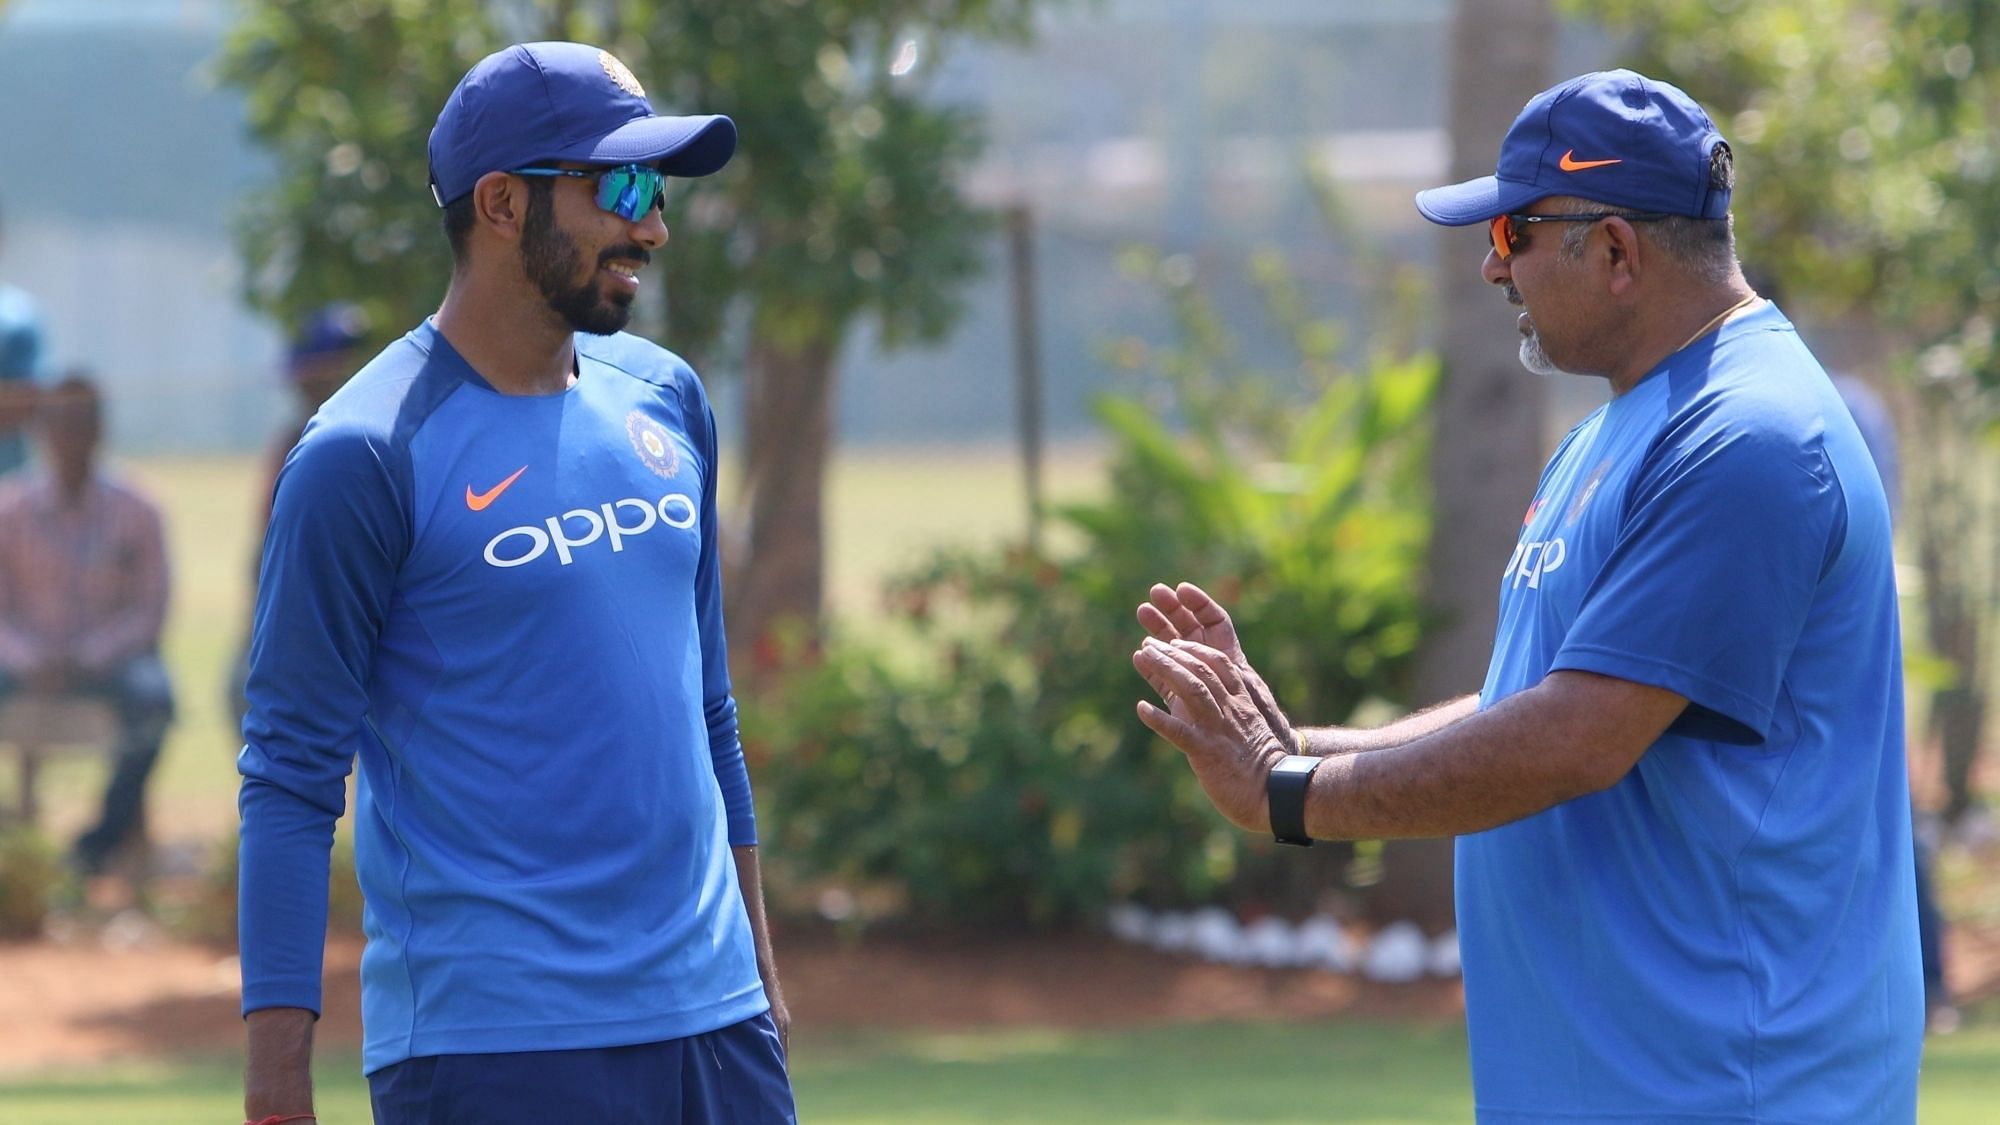 It is believed that jasprit Bumrah (left) could be brought back into the team for the ODI series against Australia.